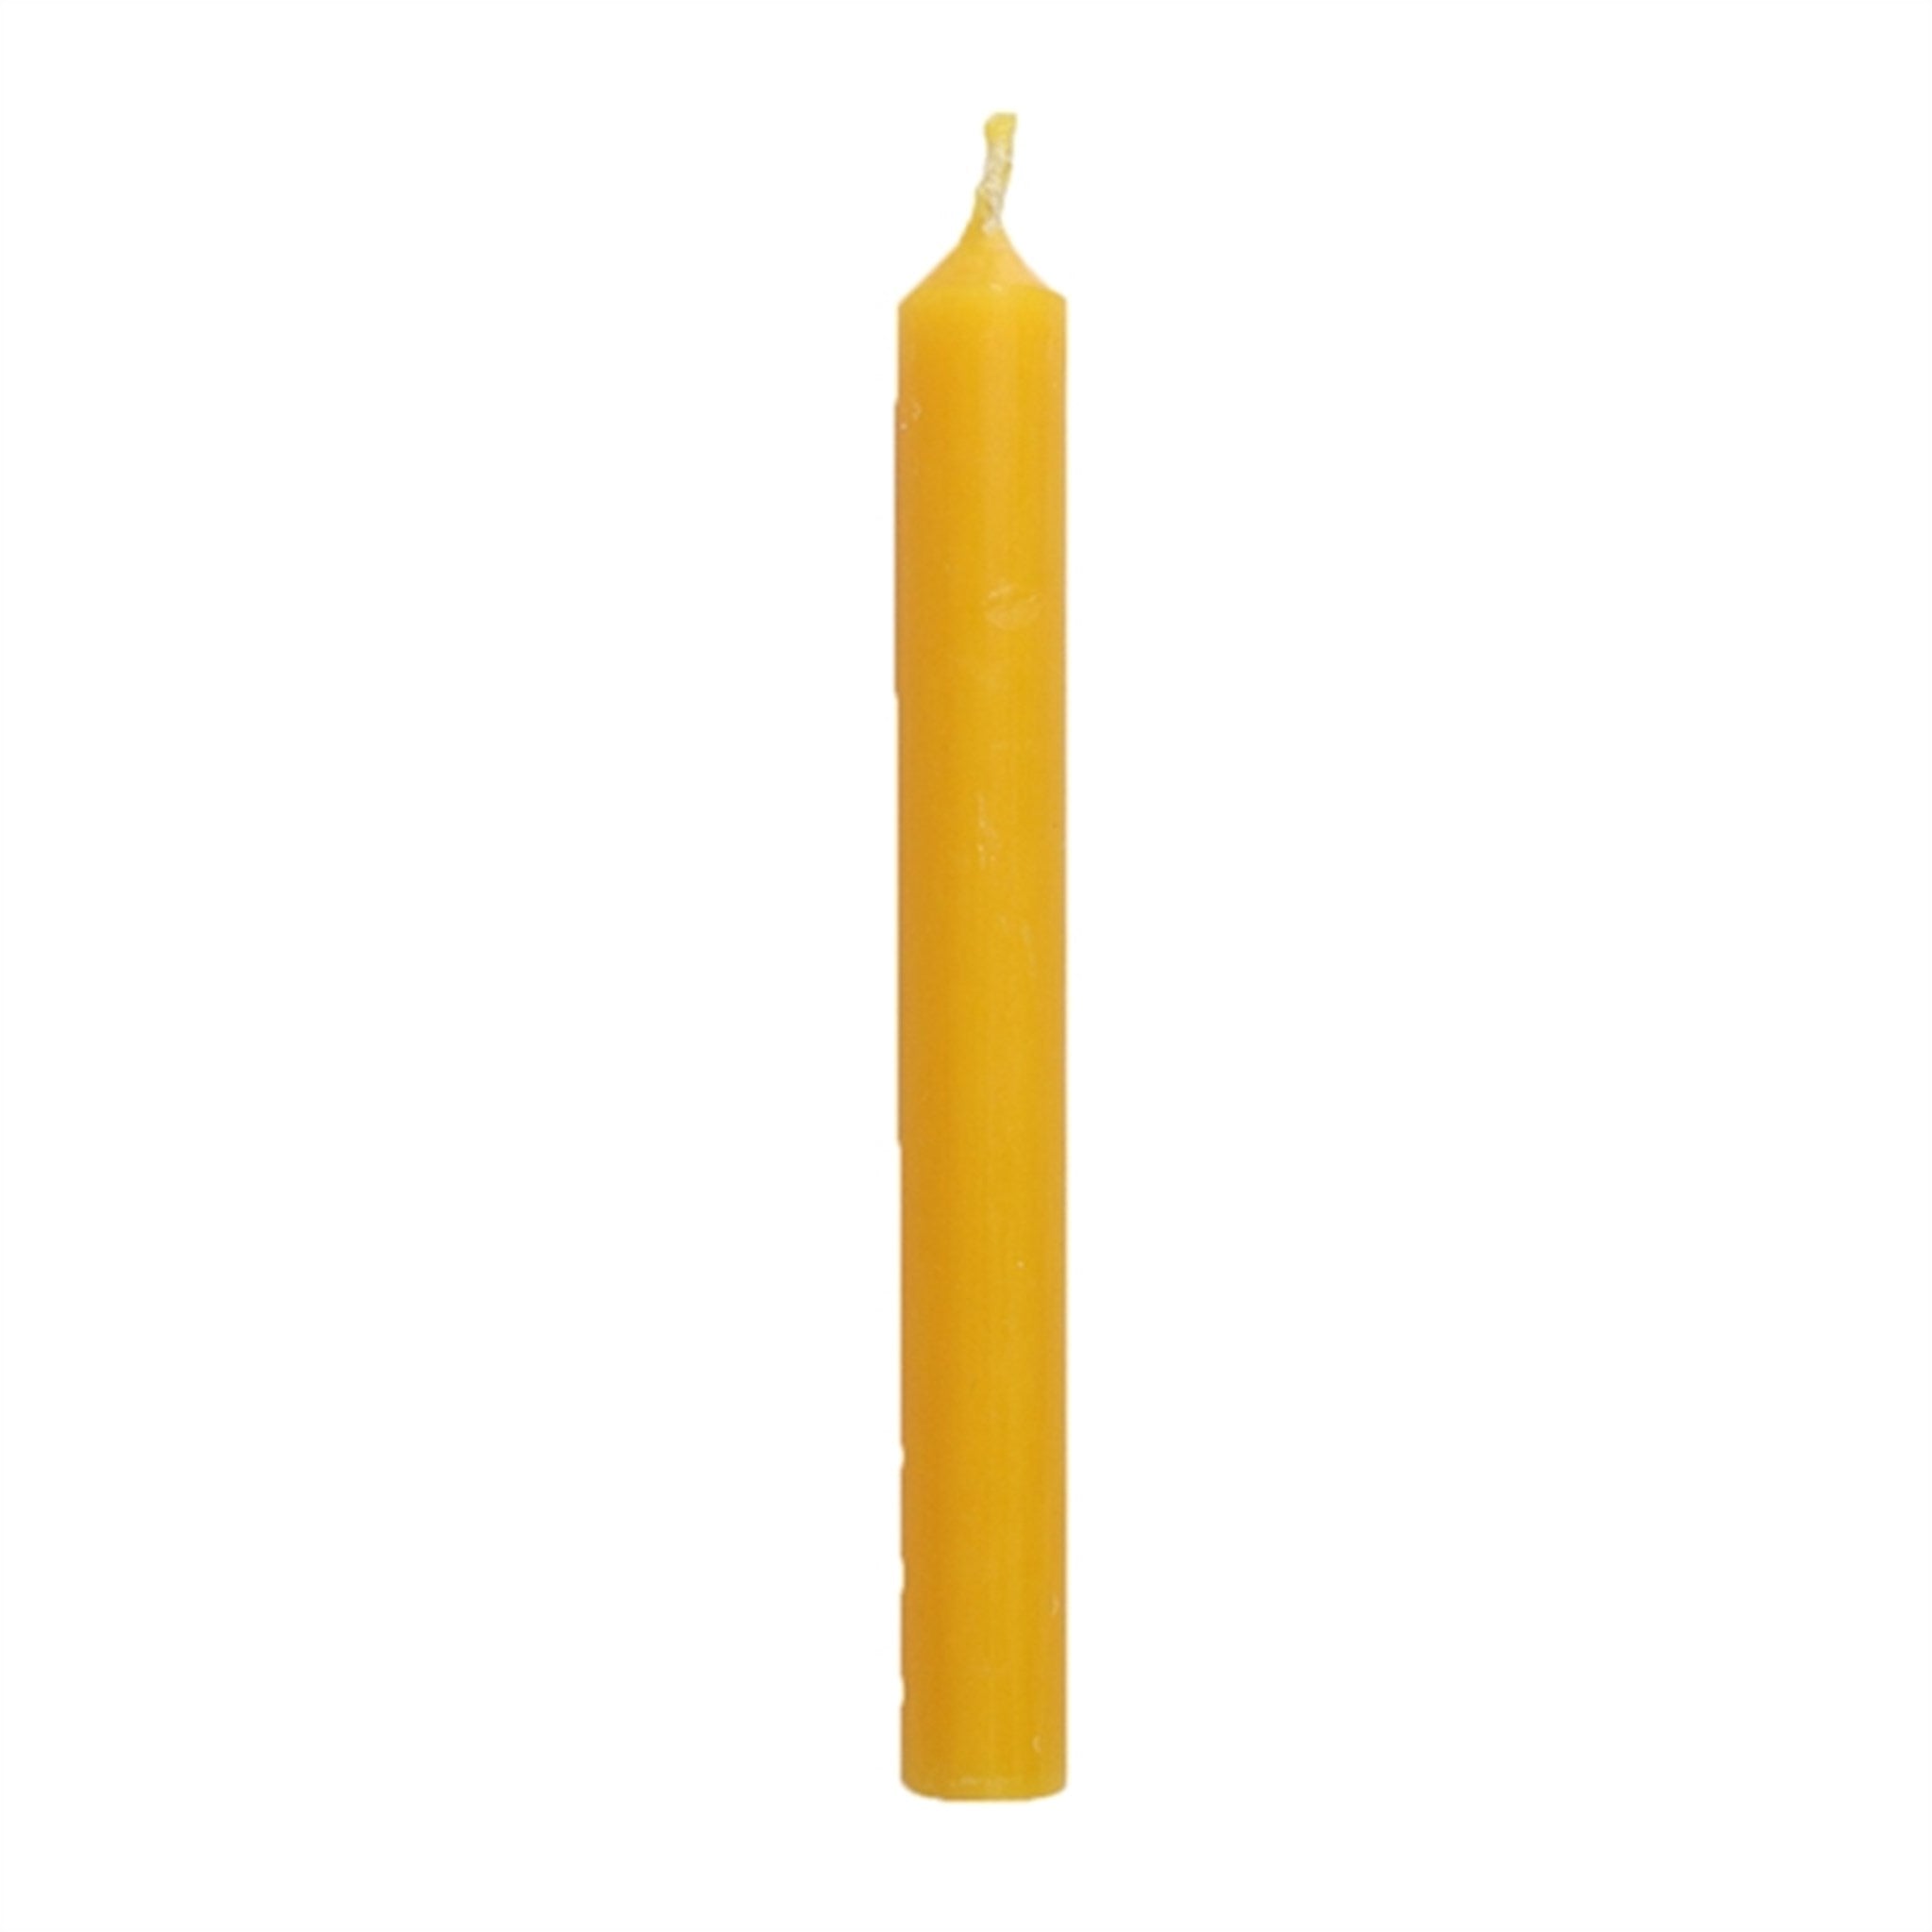 GRIMM´S Amber coloured 10% Beeswax Candles